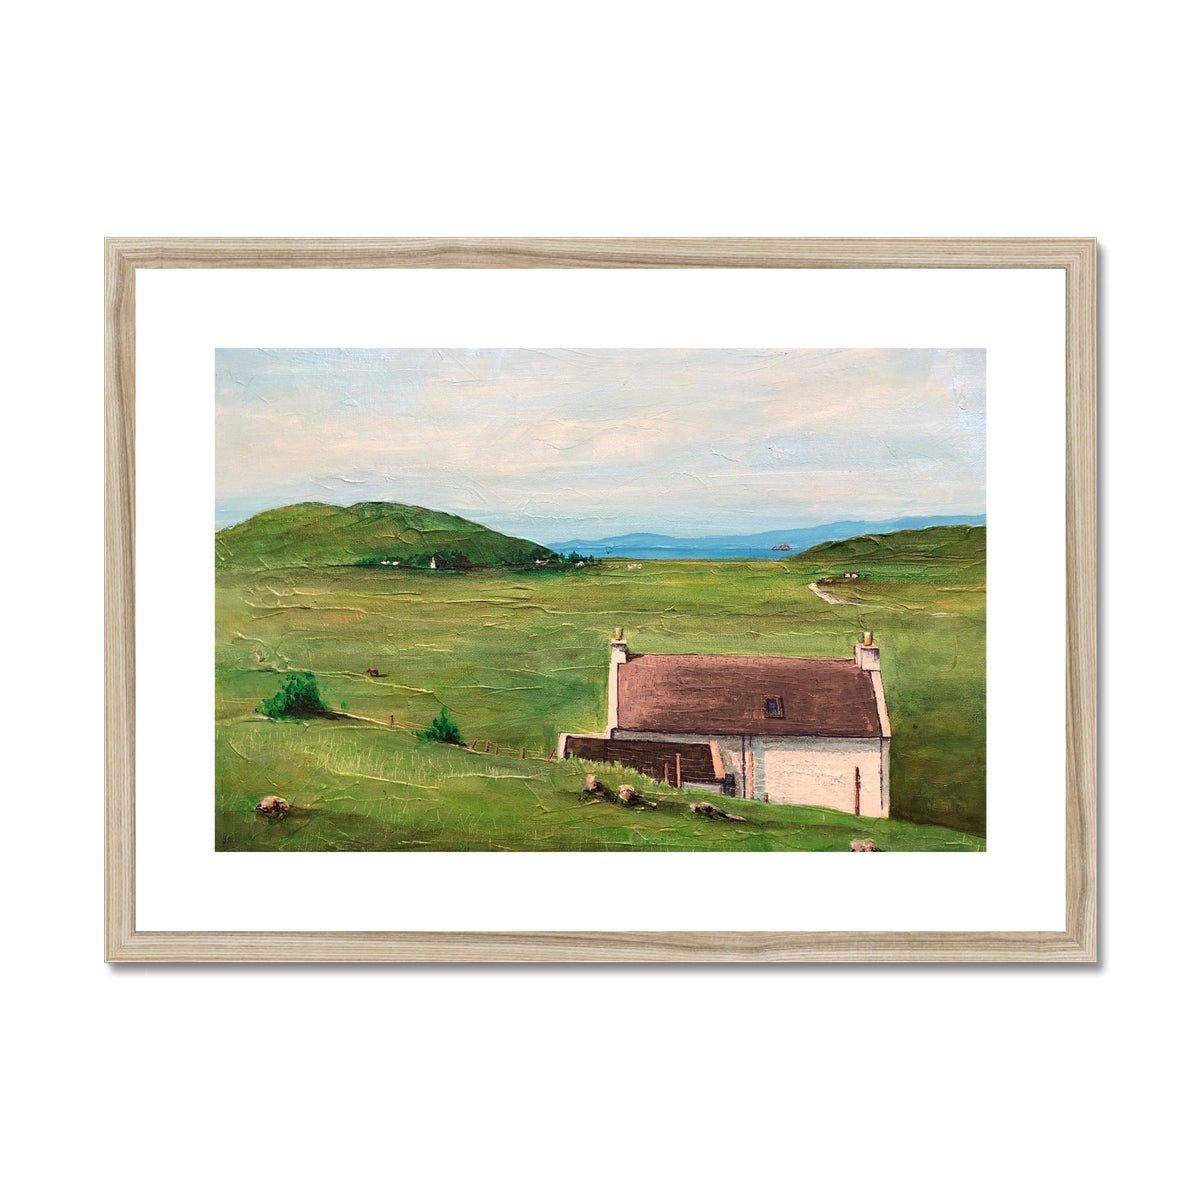 A Skye Cottage Painting | Framed & Mounted Prints From Scotland-Framed & Mounted Prints-Skye Art Gallery-A2 Landscape-Natural Frame-Paintings, Prints, Homeware, Art Gifts From Scotland By Scottish Artist Kevin Hunter